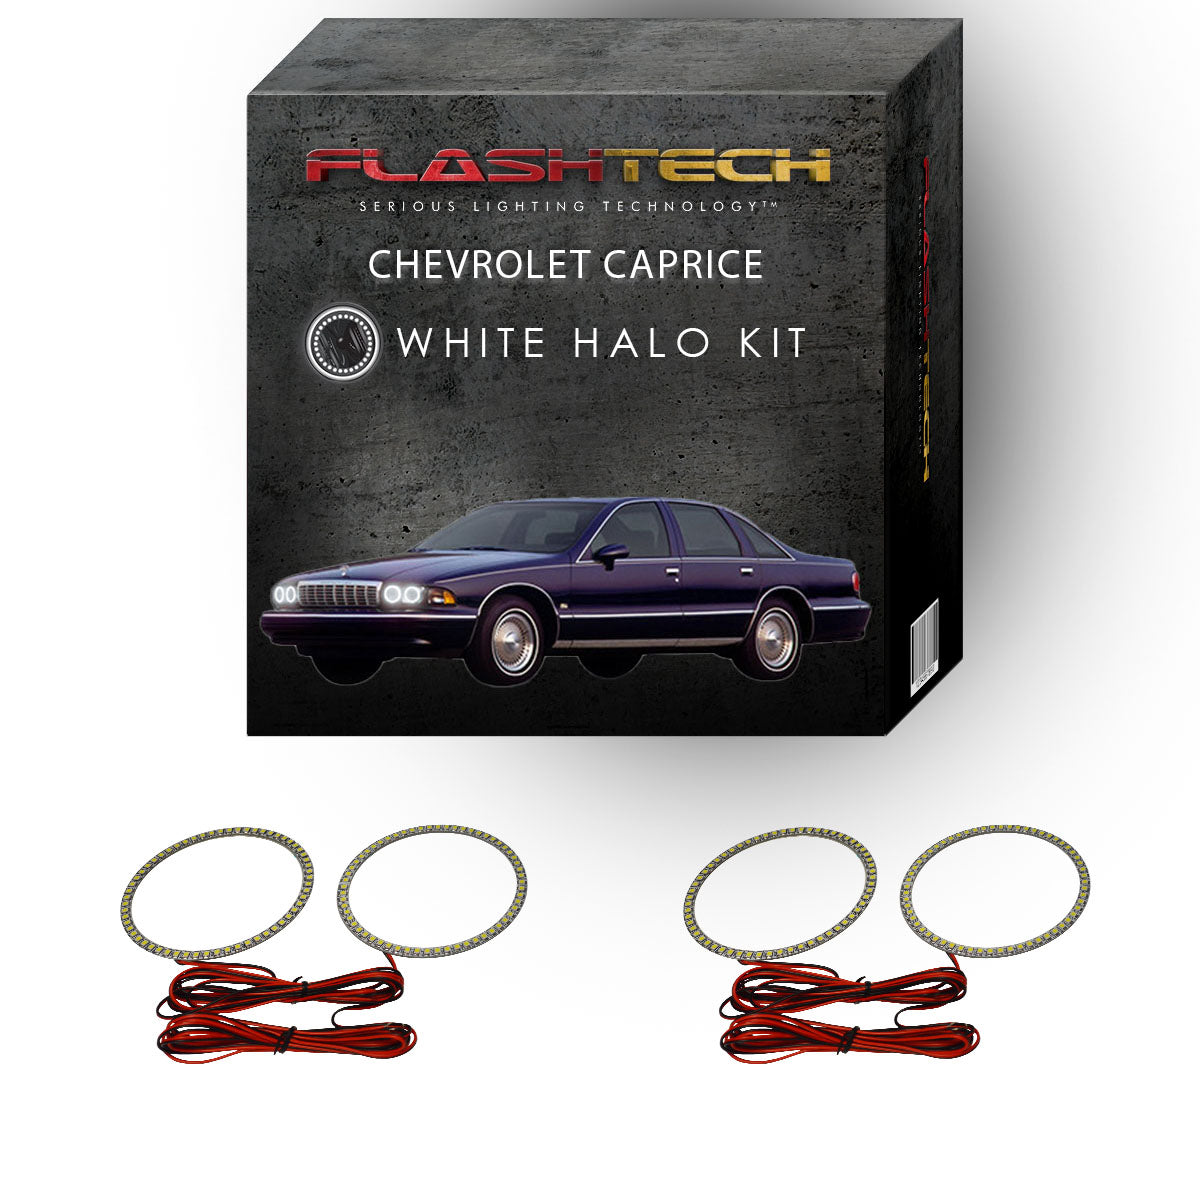 Chevrolet-Caprice-1991, 1992, 1993, 1994, 1995, 1996-LED-Halo-Headlights-White-RF Remote White-CY-CP9196-WHRF